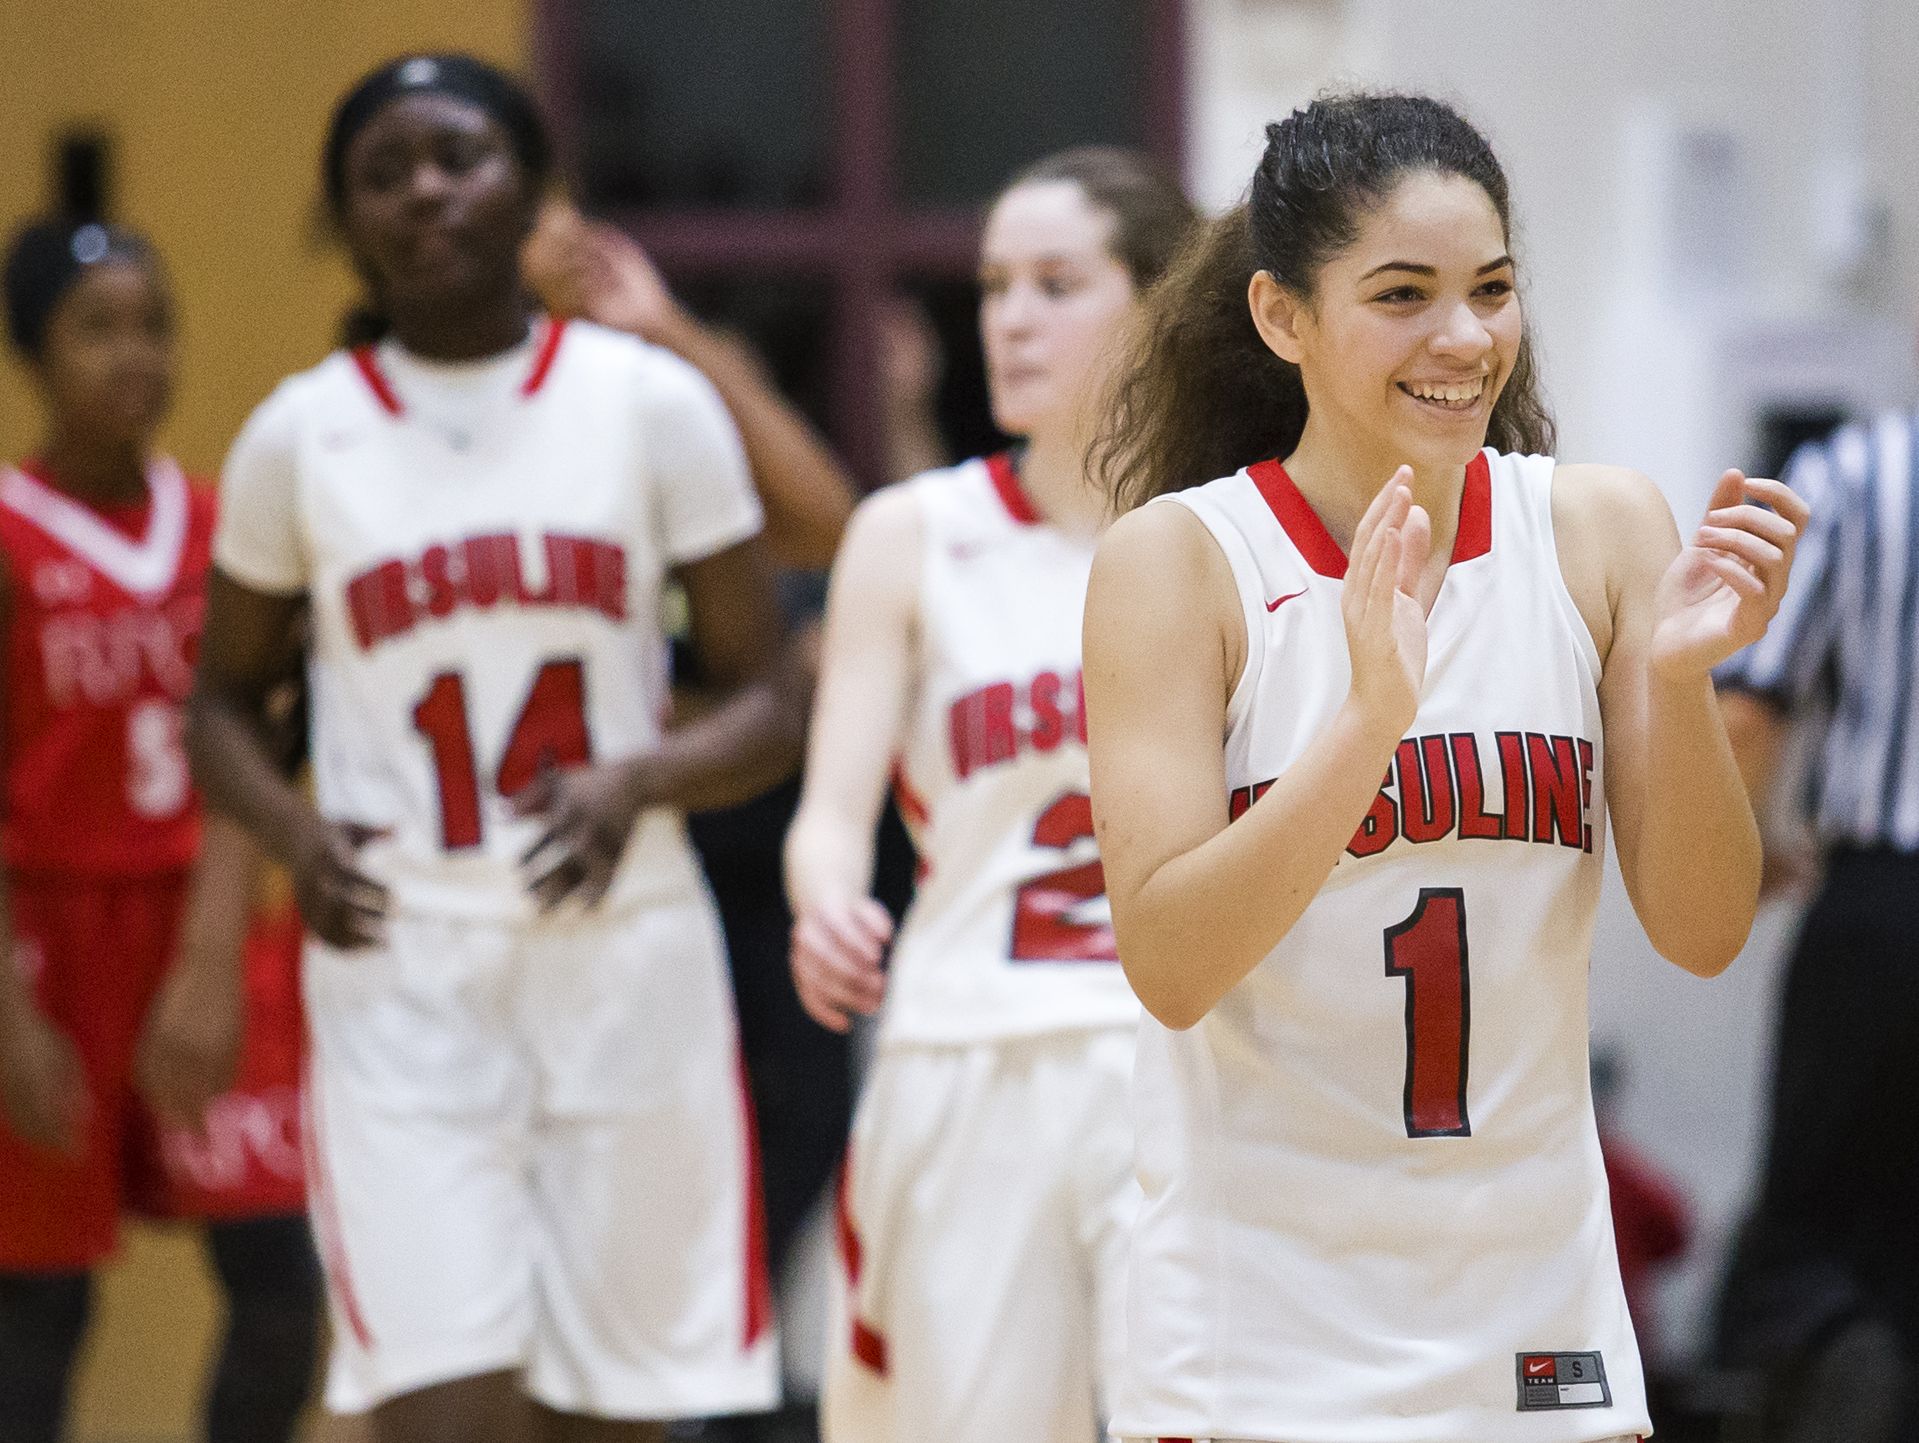 Ursuline's Alisha Lewis celebrates following Ursuline Academy's 47-40 win over Roland Park Country School in the Diamond State Classic at St. Elizabeth High School in Wilmington on Friday evening.